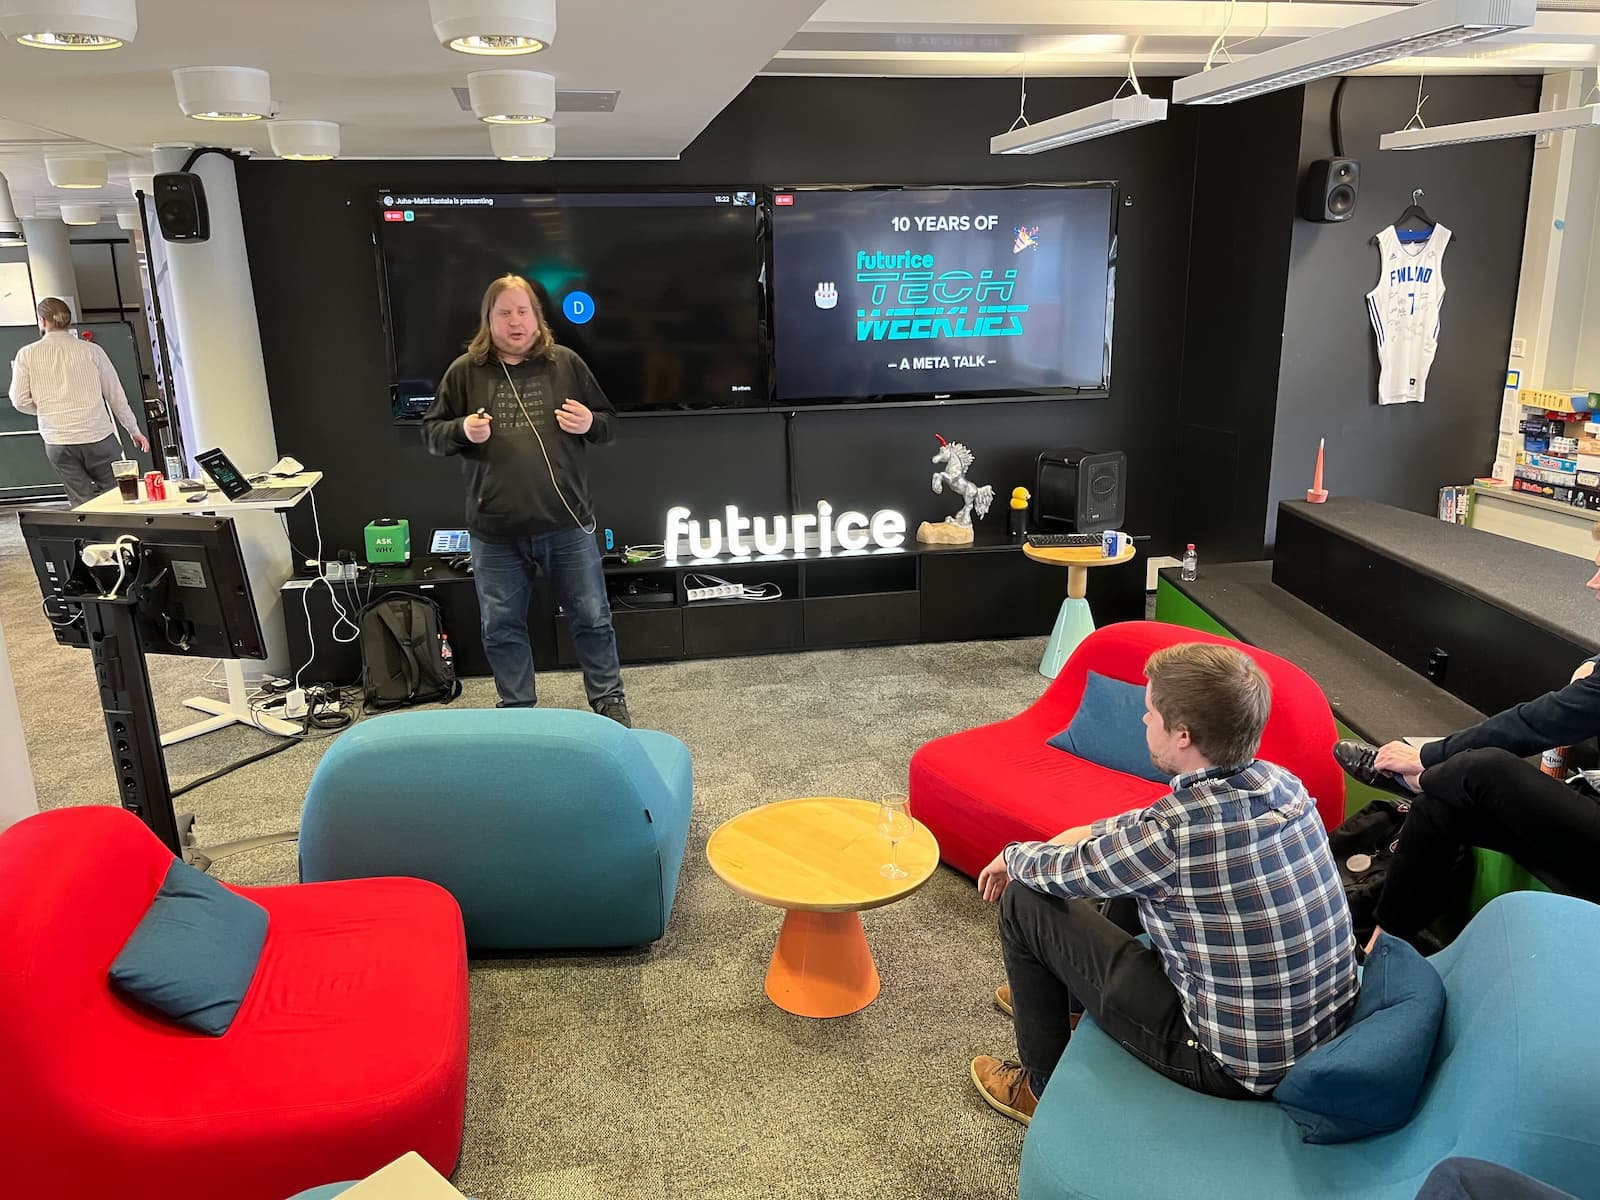 Me on a stage in front of small developer audience, wearing a headset and "It depends" hoodie. A slide behind me says "10 years of Futurice Tech Weeklies" with a few party emojis.